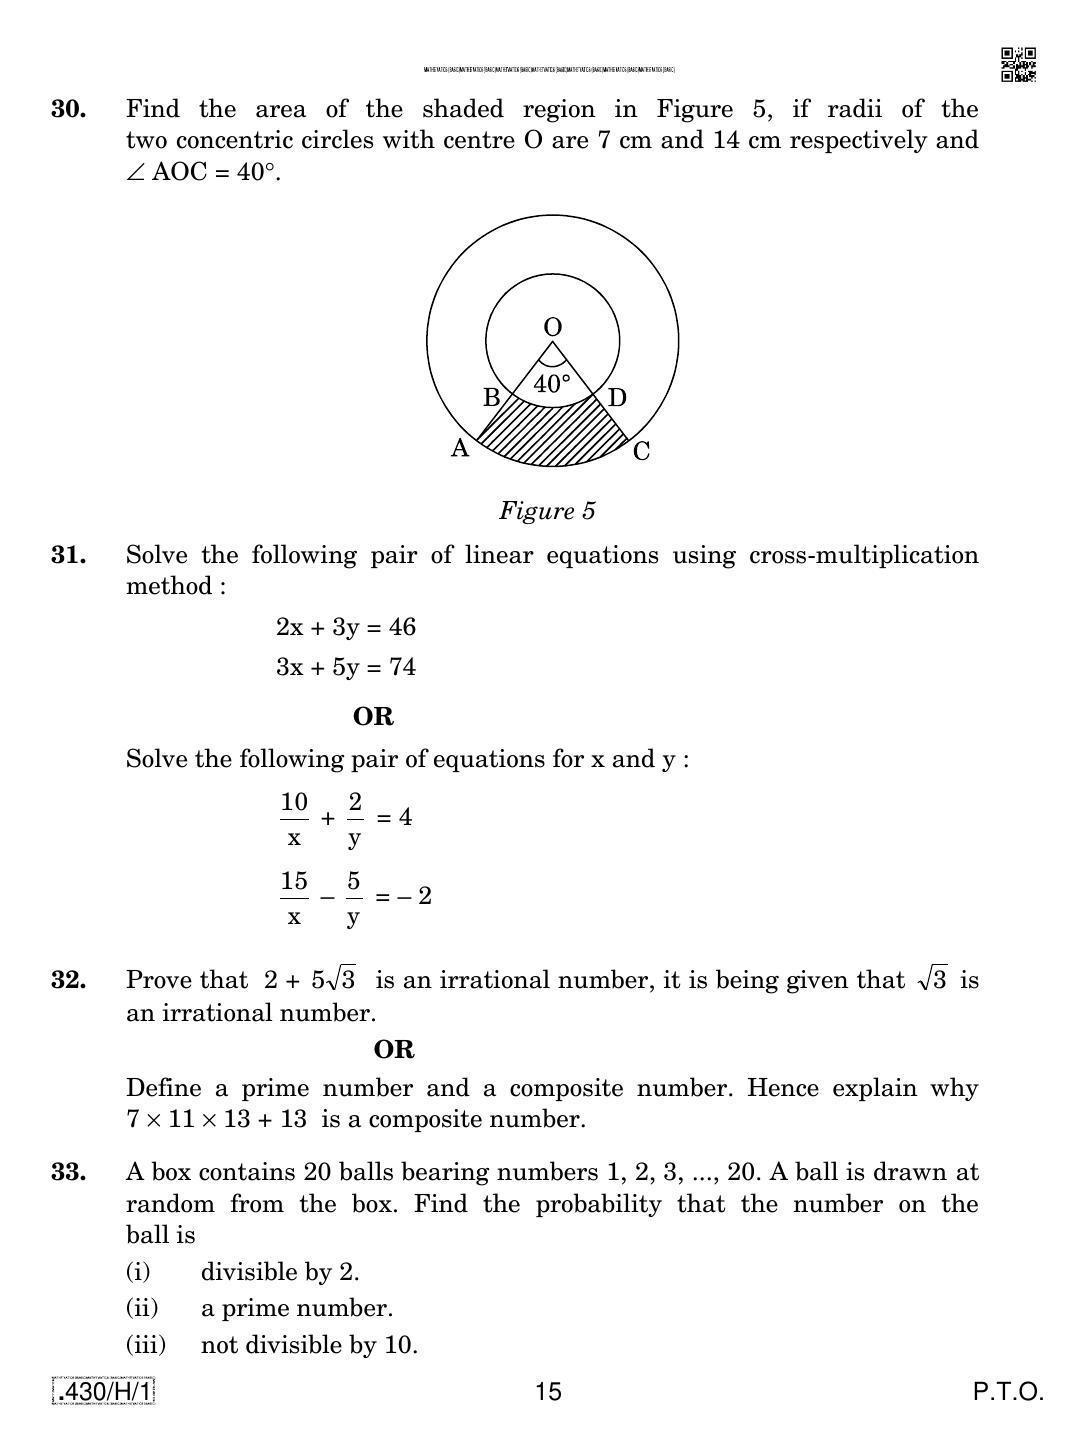 CBSE Class 10 430-C-1 - Maths (Basic) 2020 Compartment Question Paper - Page 15